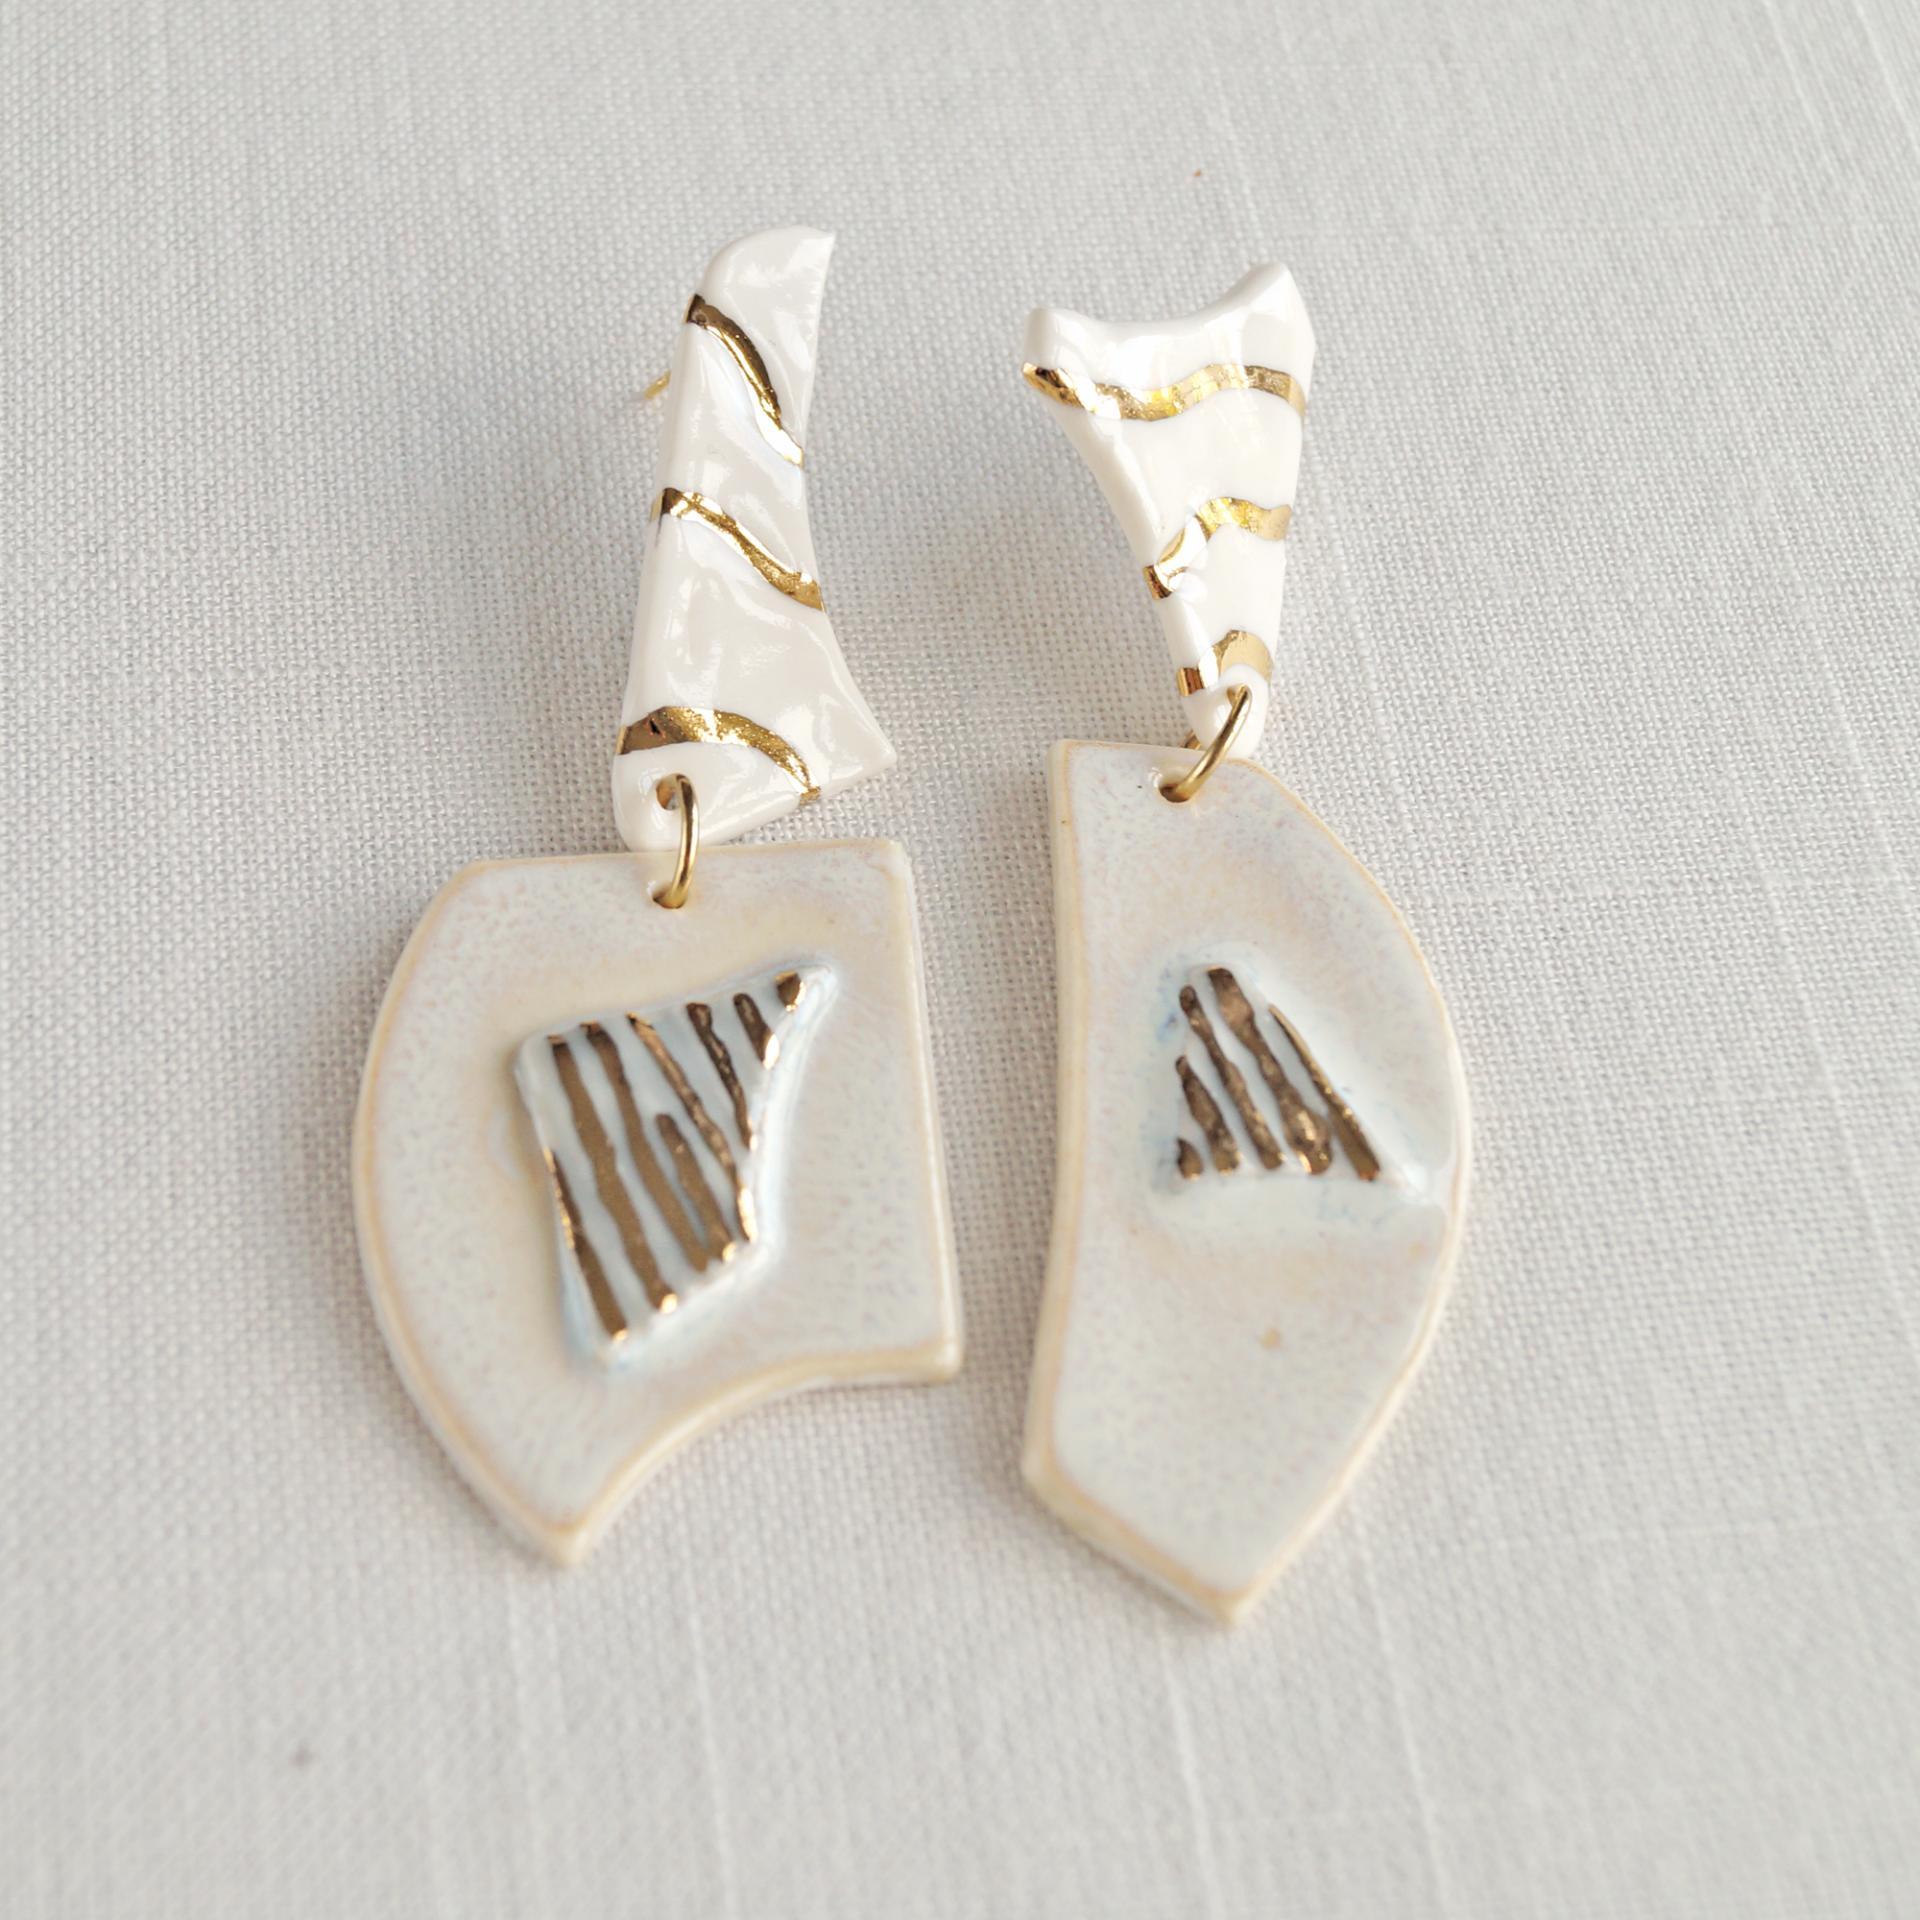 No2, TERRAZZO earrings, mis-matched earrings, porcelain, 24 carat gold, TERRAZZO inspired, mis-matched earrings, gold white p